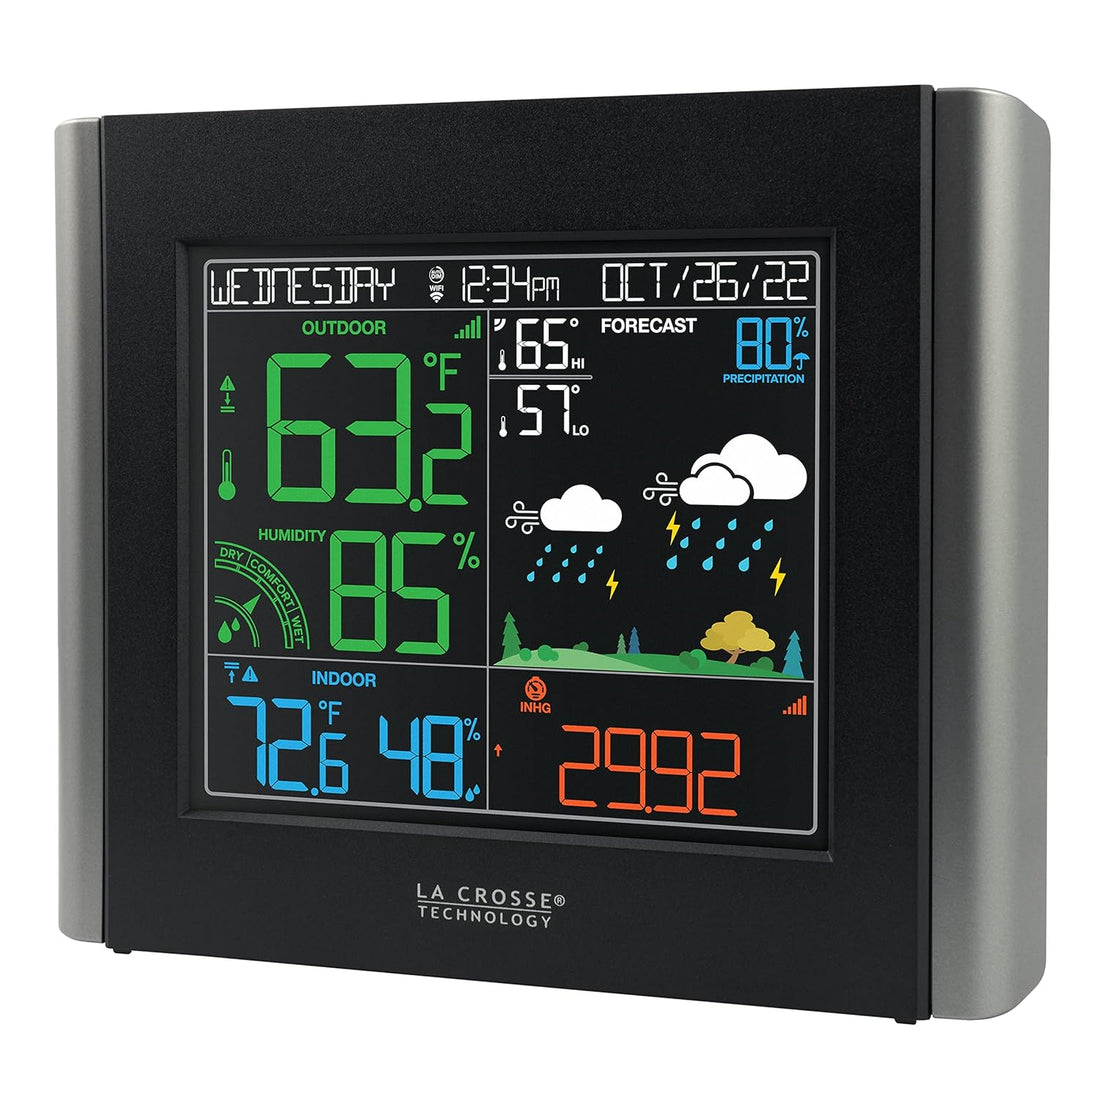 La Crosse Technology V10-Wth-Int Color Wireless WiFi Essential Weather Station